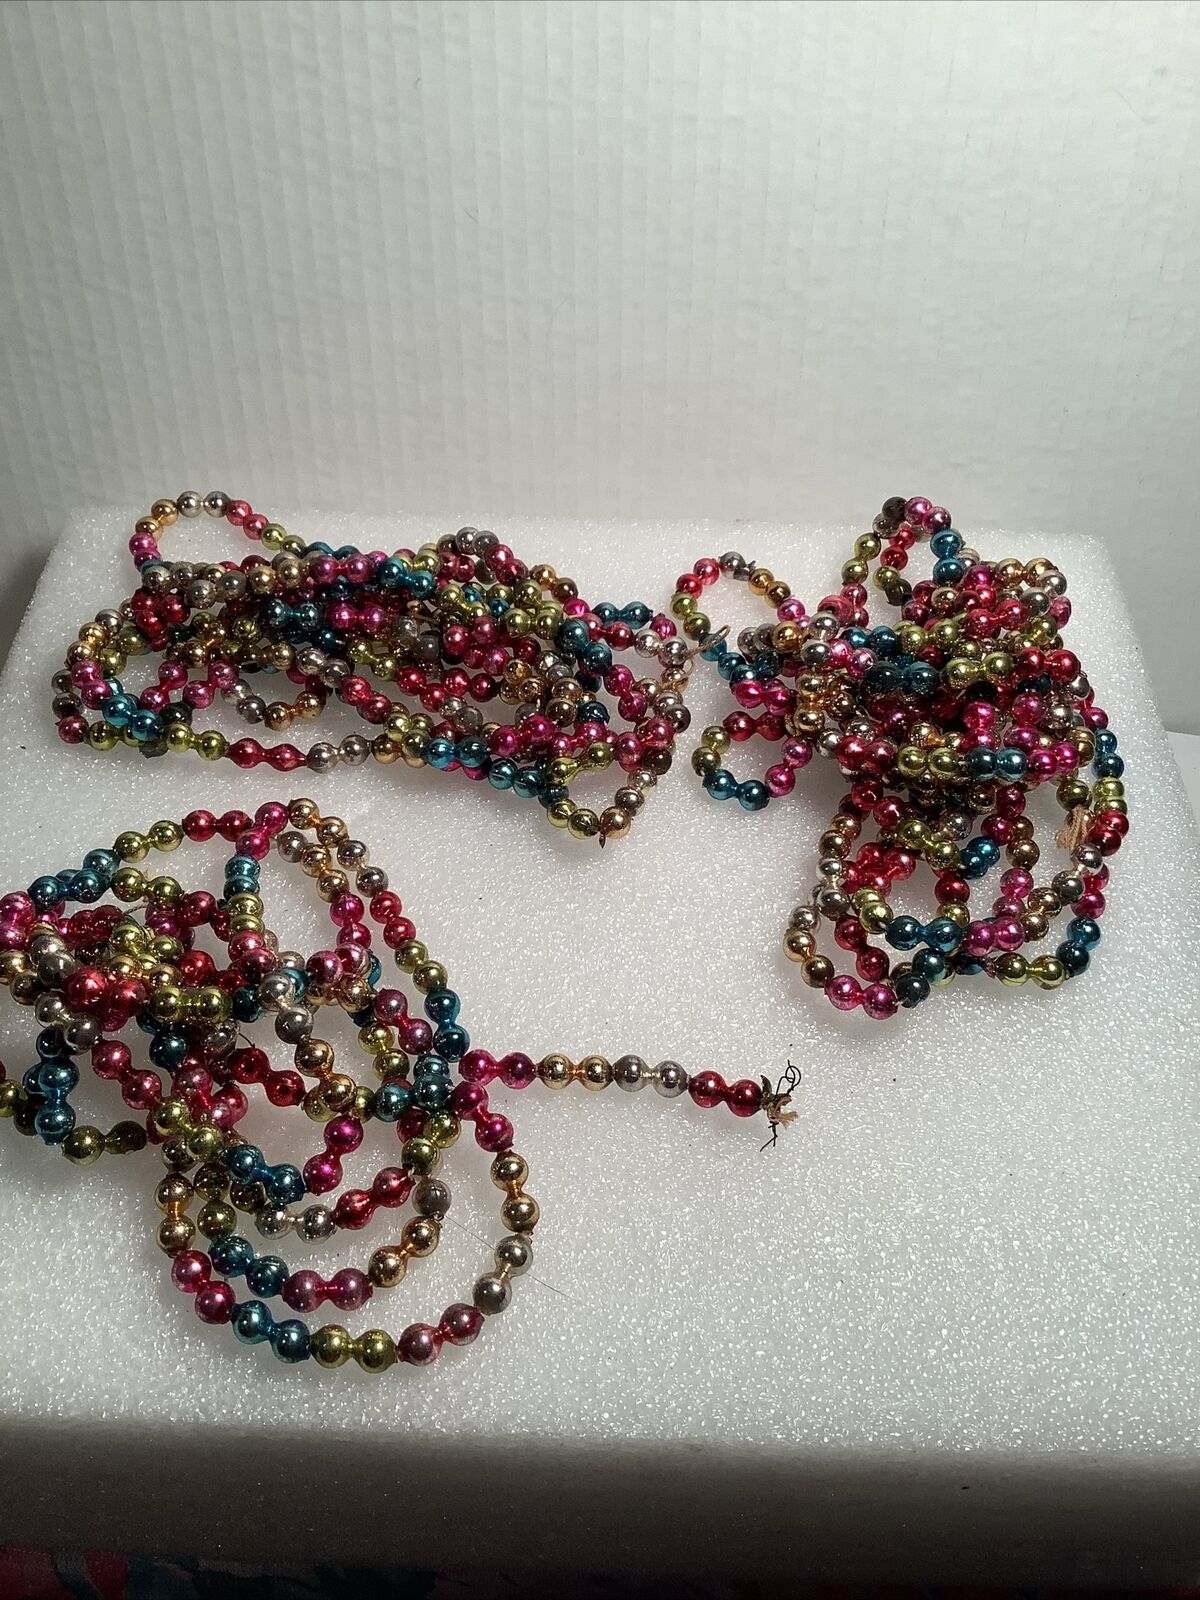 VTG Christmas Garland Beads Ornaments Mercury Glass Lot of 3 pink multi color